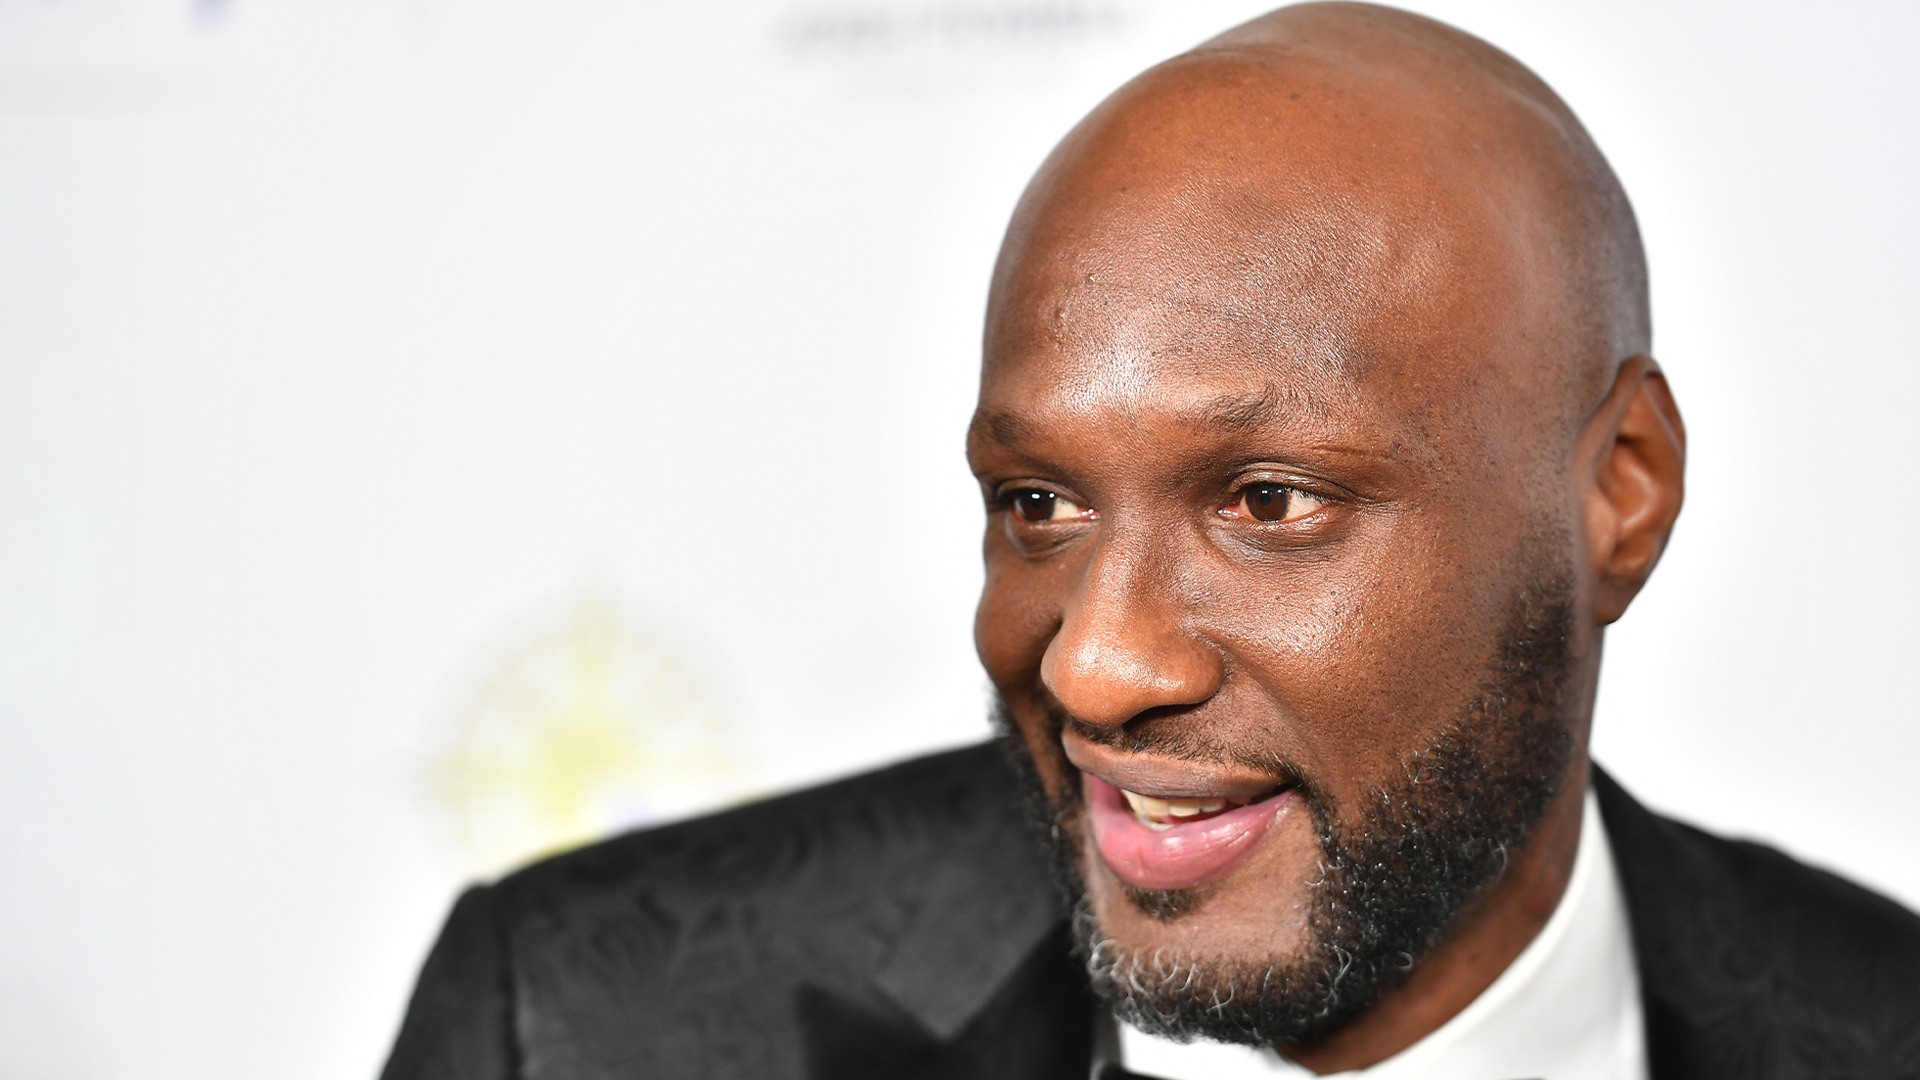 Lamar Odom Opens Long-Term Assisted Living Facility For Seniors Dedicated To His 96-Year-Old Grandmother